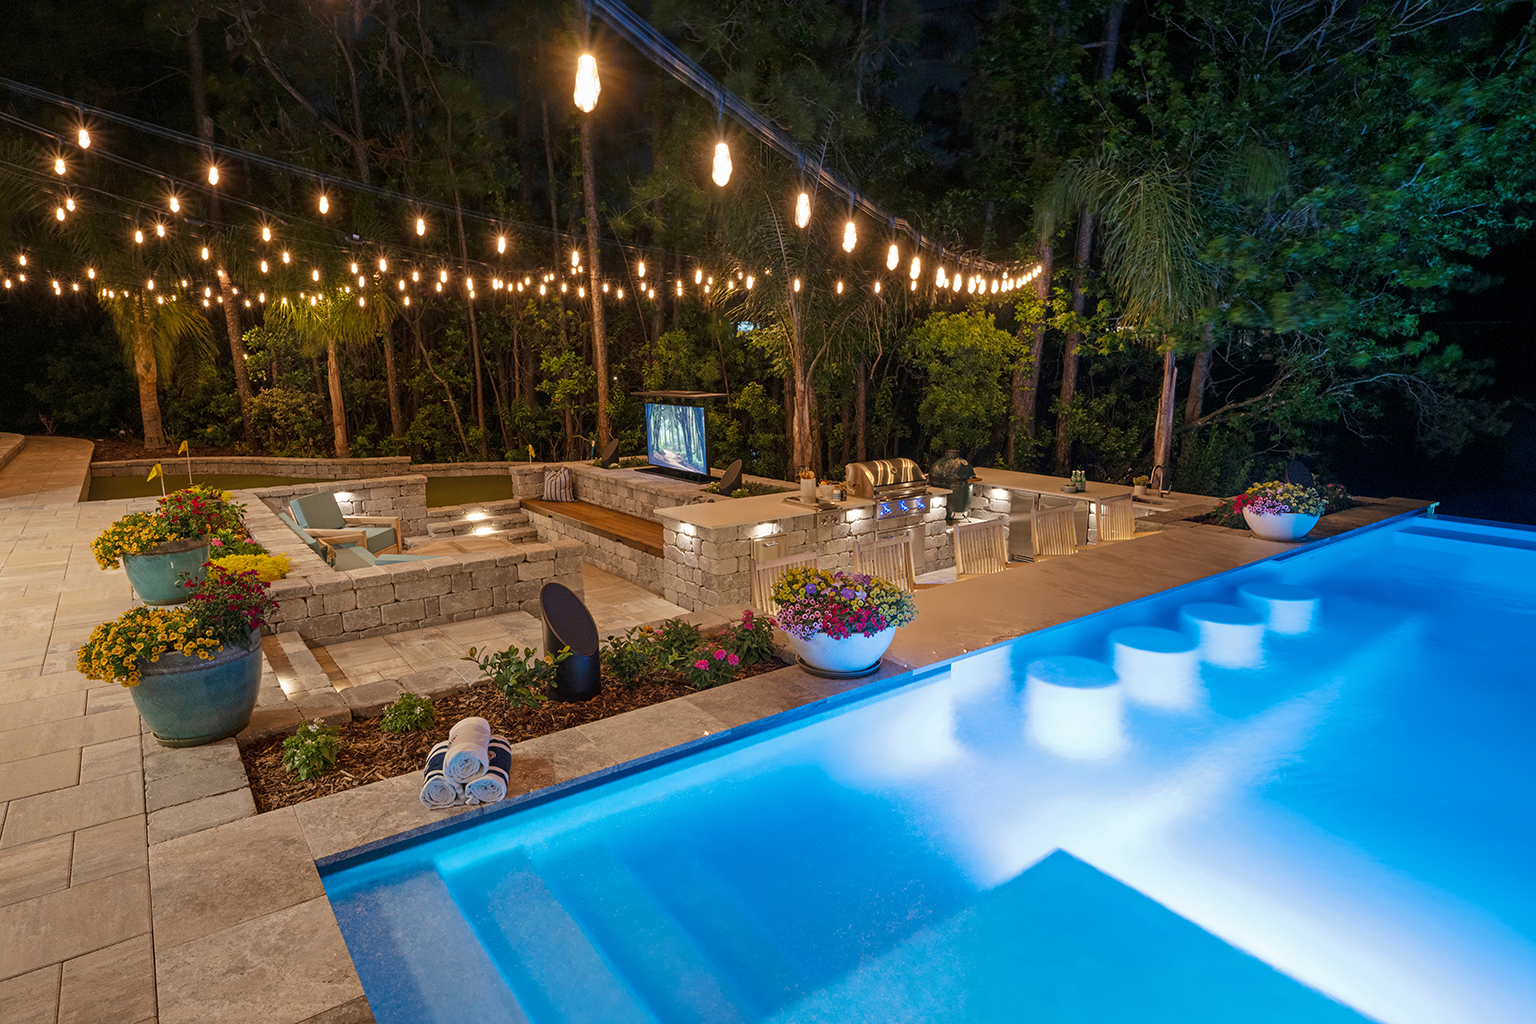 Luxury Outdoor Living | Featured image for “Peaceful Paradise” Jacksonville, FL